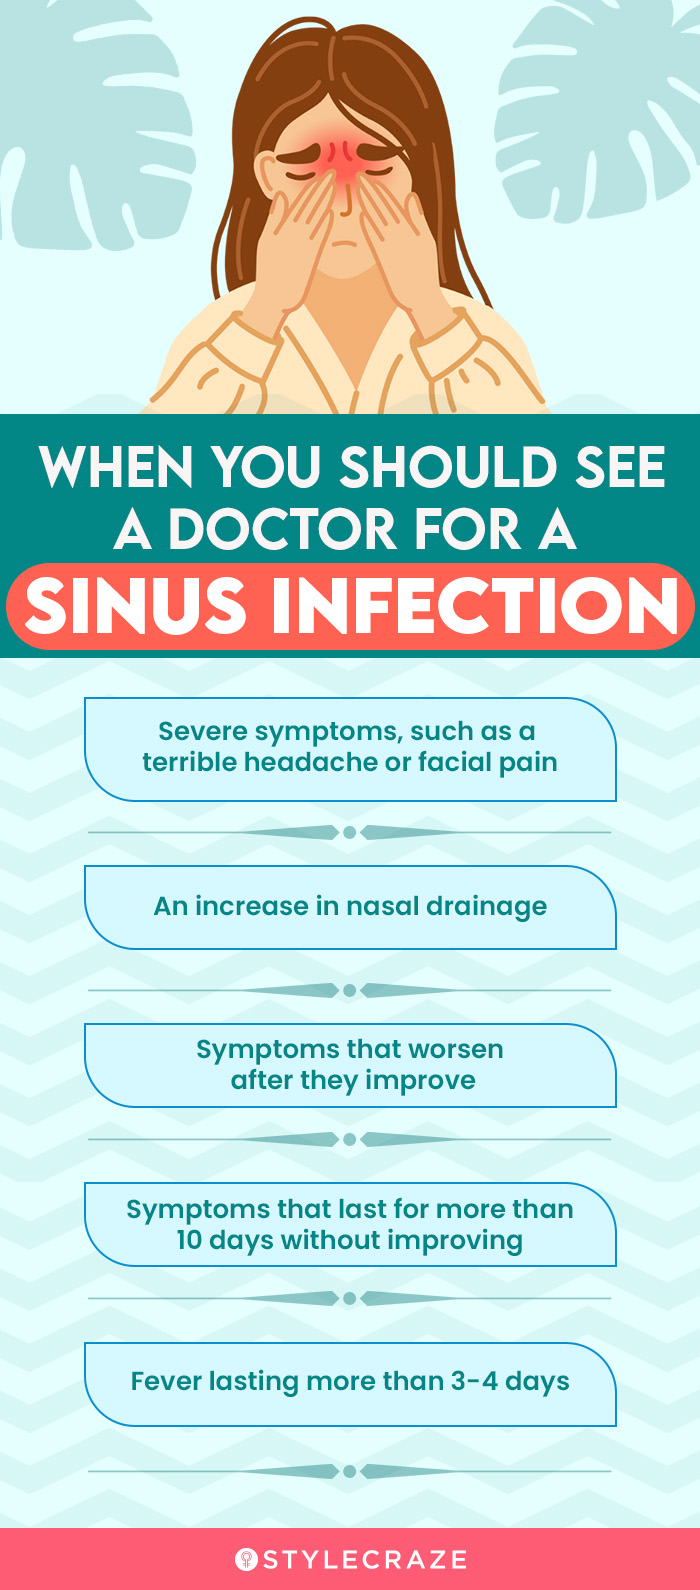 when you should see a doctor for a sinus infection [infographic]